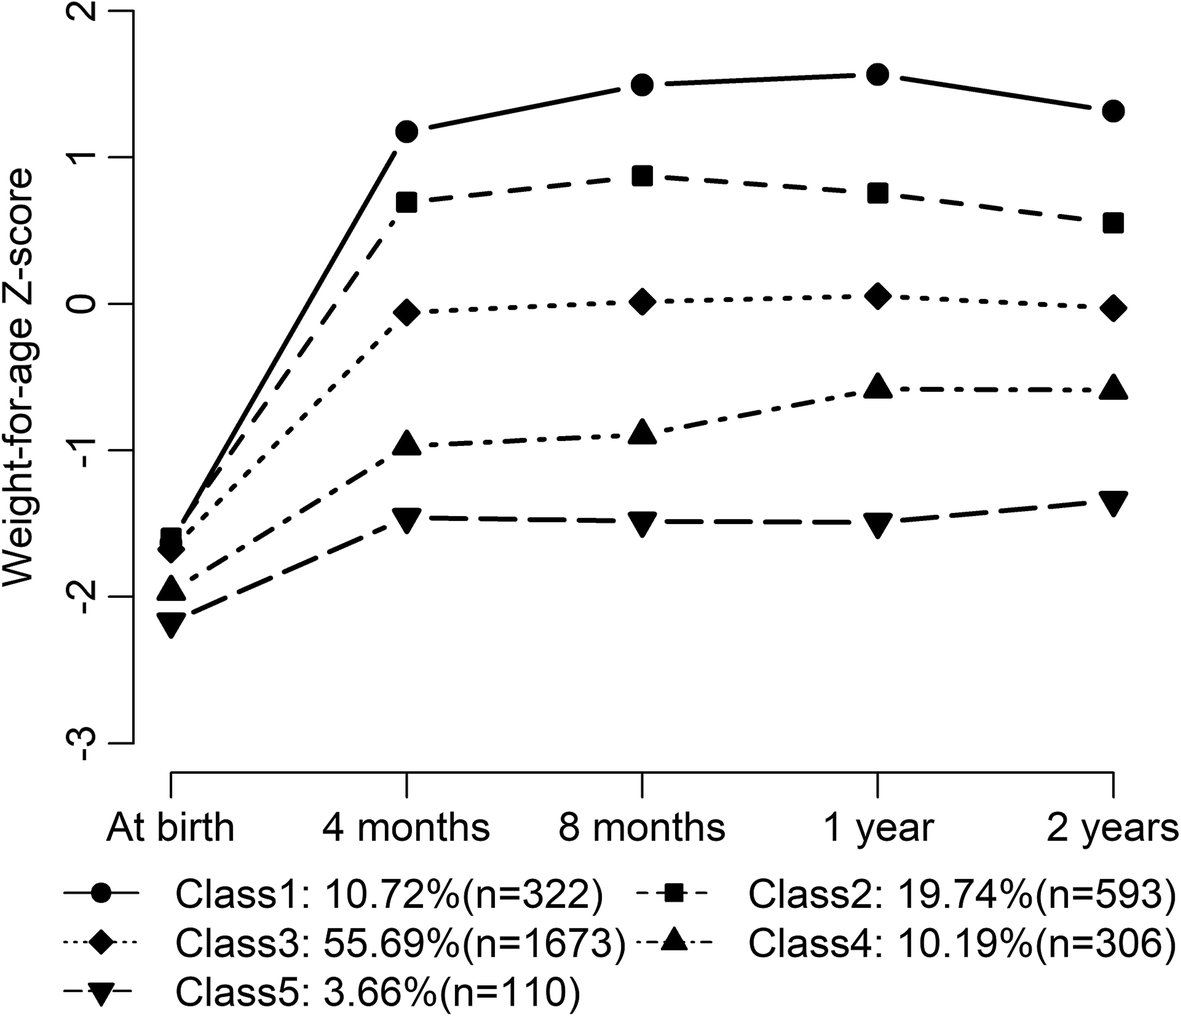 Insights Into Infancy Weight Gain Patterns For Term Small For